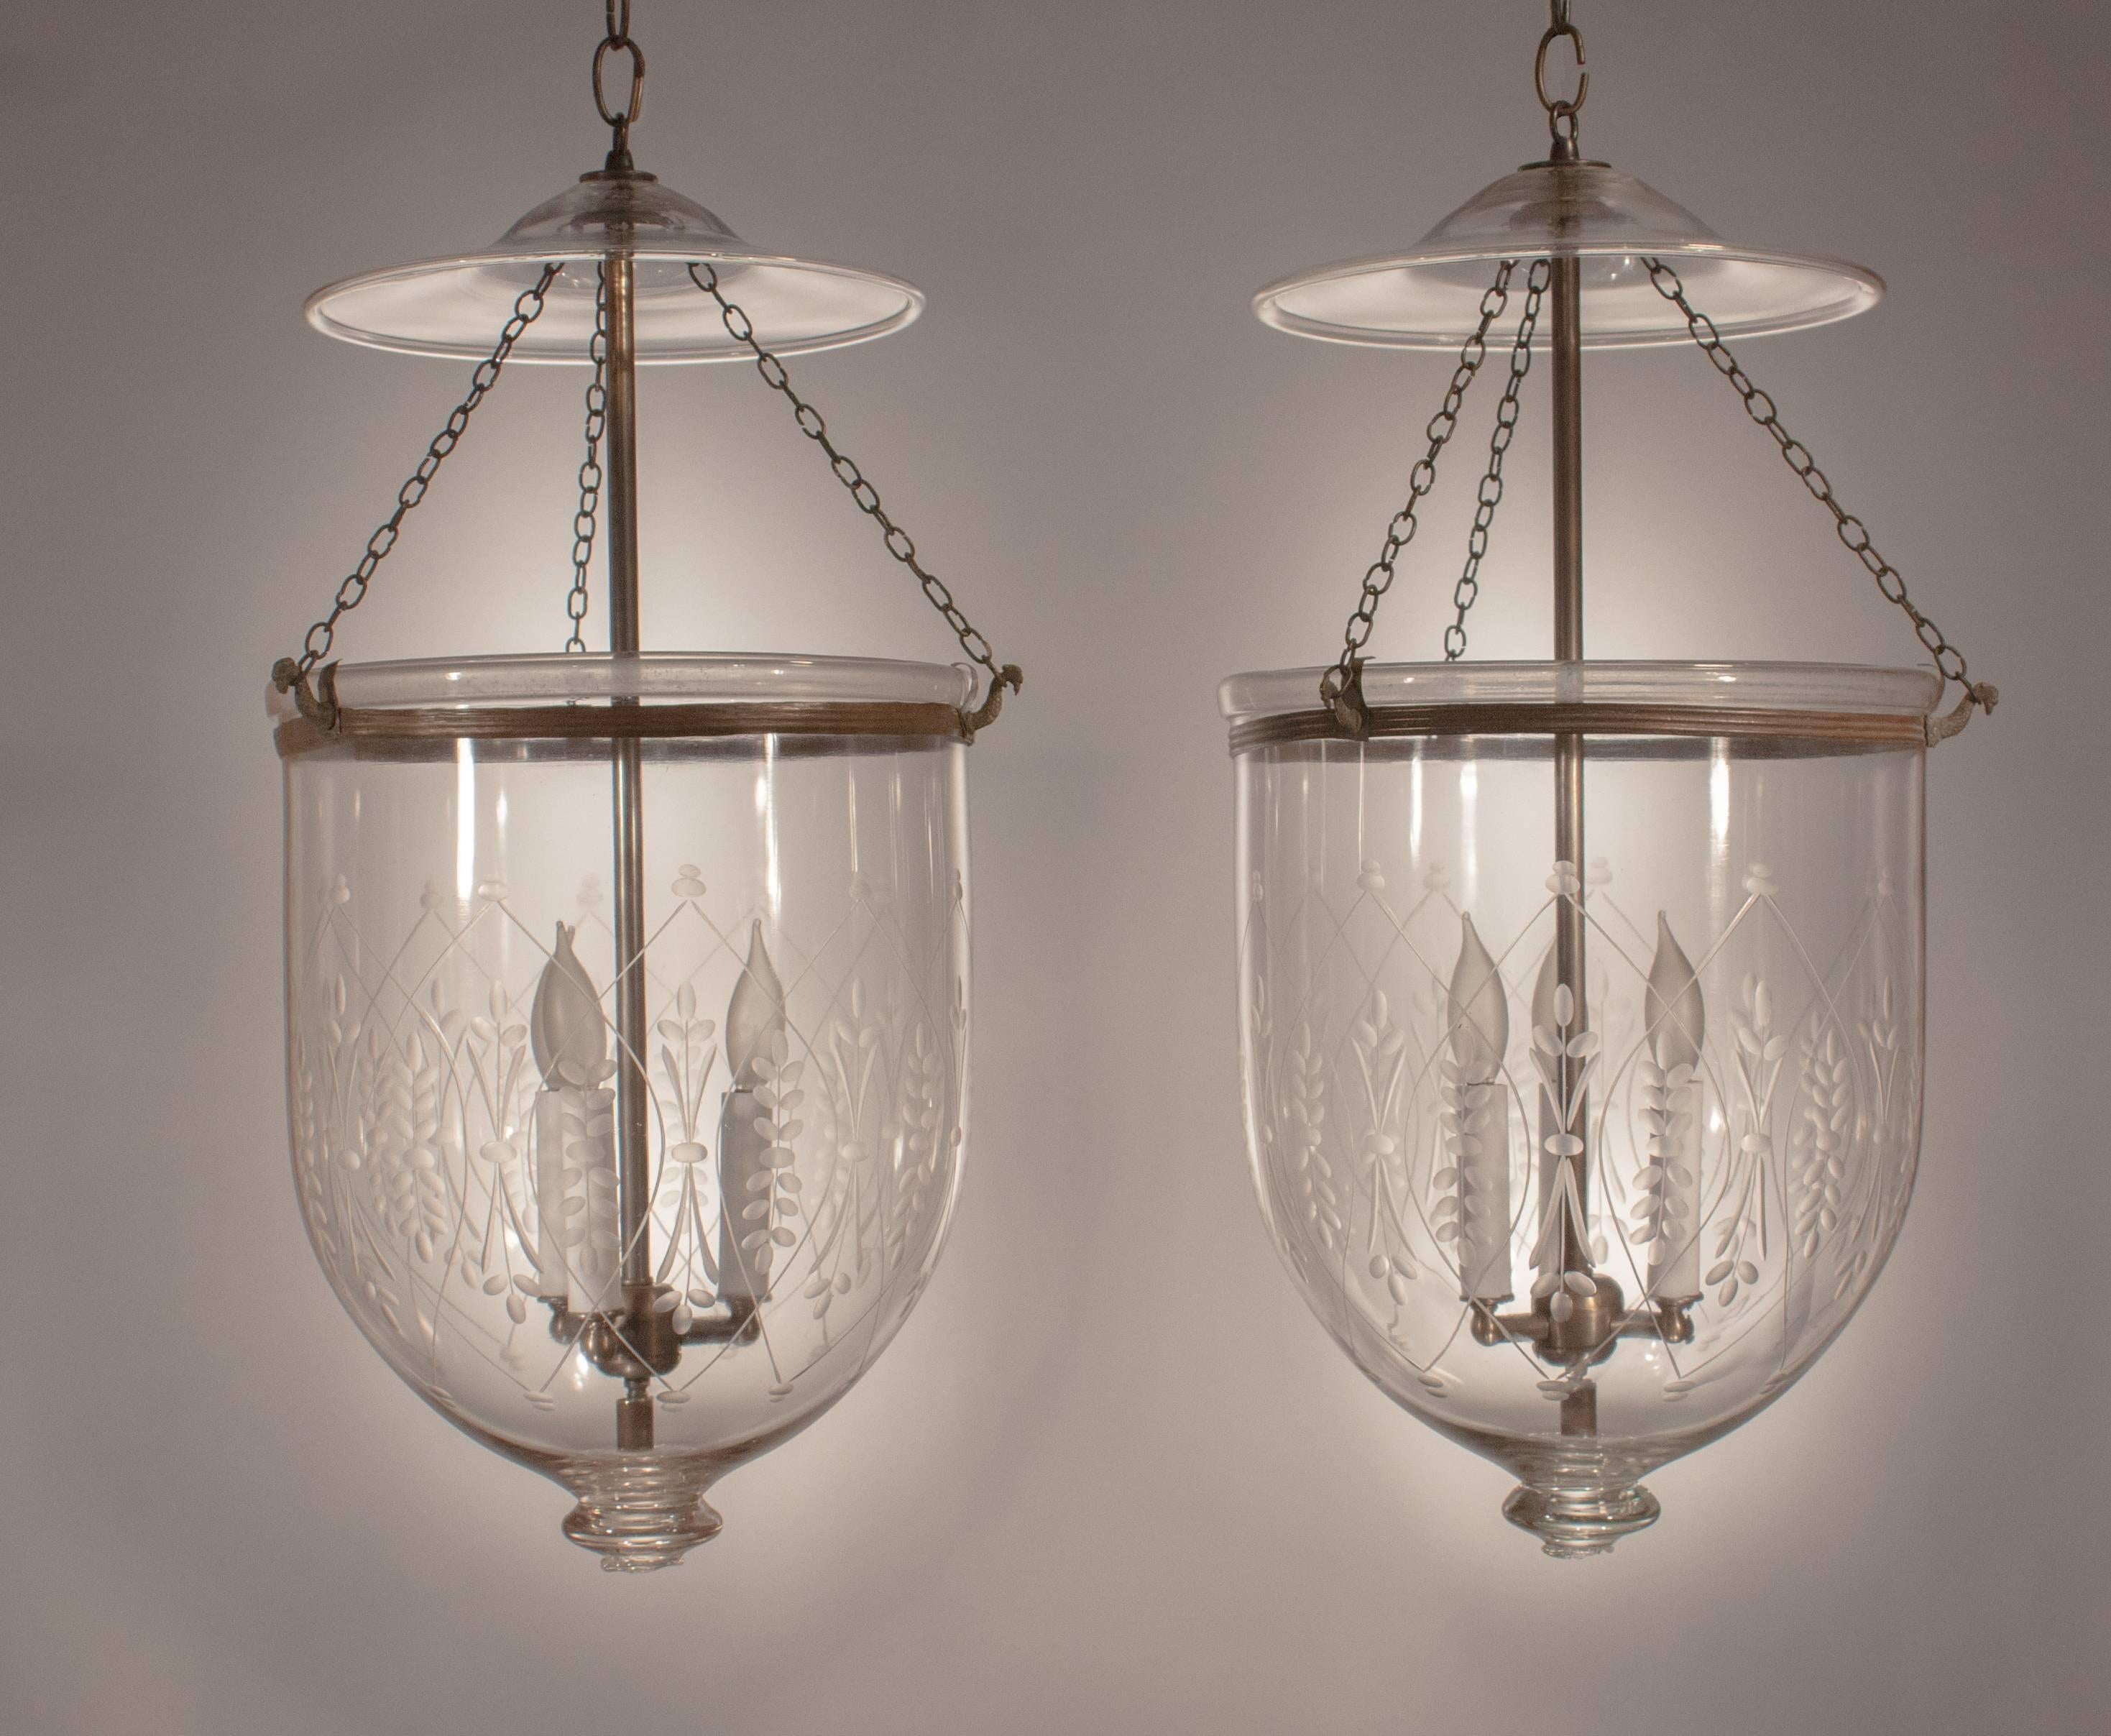 A well-matched pair of large glass bell jar lanterns, circa 1890, with an etched wheat stalk design. Voluminous in form, these authentic 19th century hall lanterns have their original smoke bells and ribbed brass bands. Hand blown by S and C Bishop